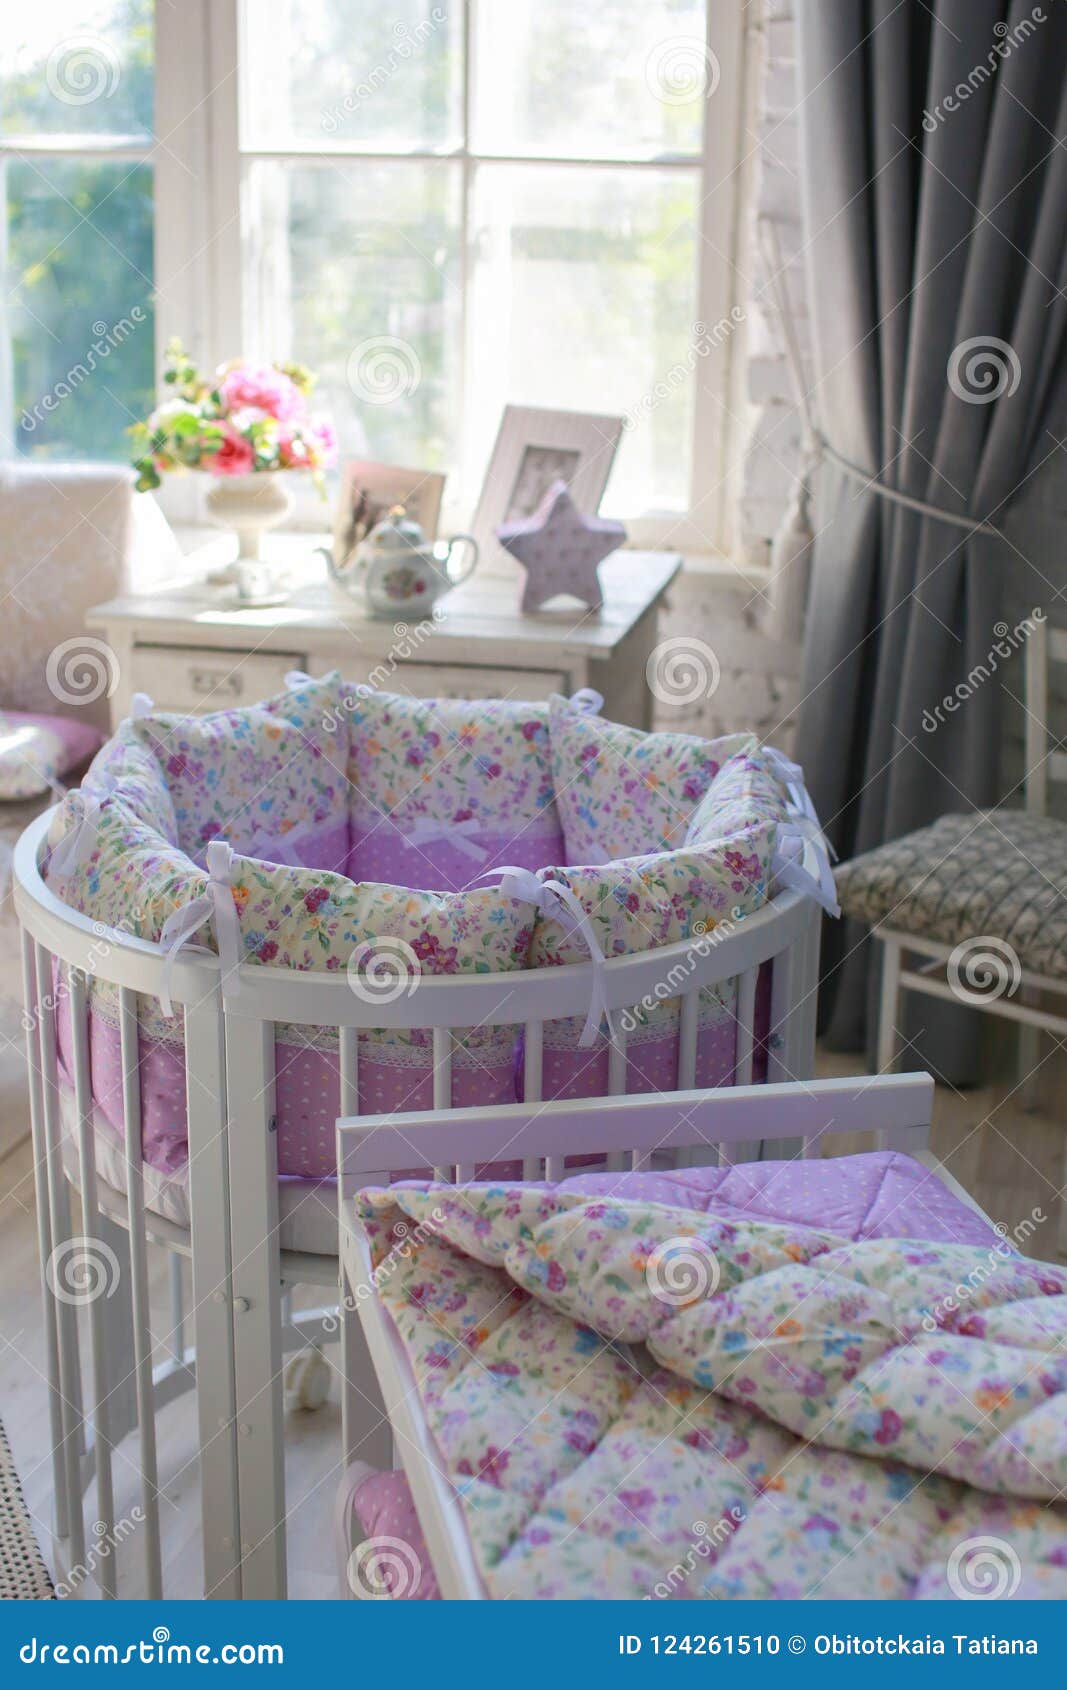 White Cribs For Babies Round Shape Stock Photo Image Of Large